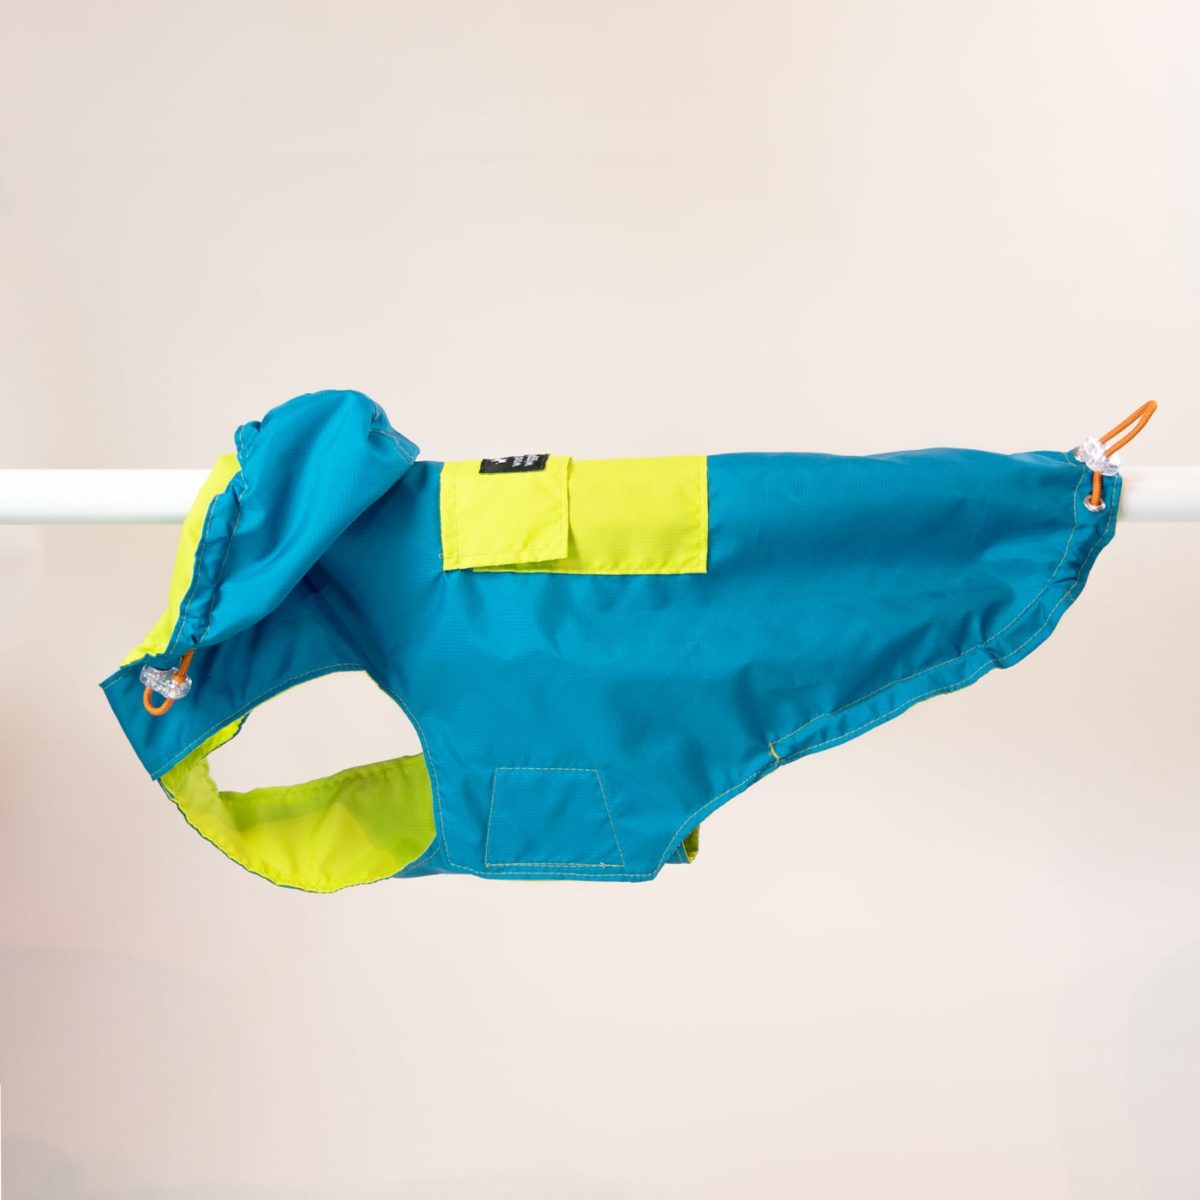 Raincoat for dogs in petrol und lime